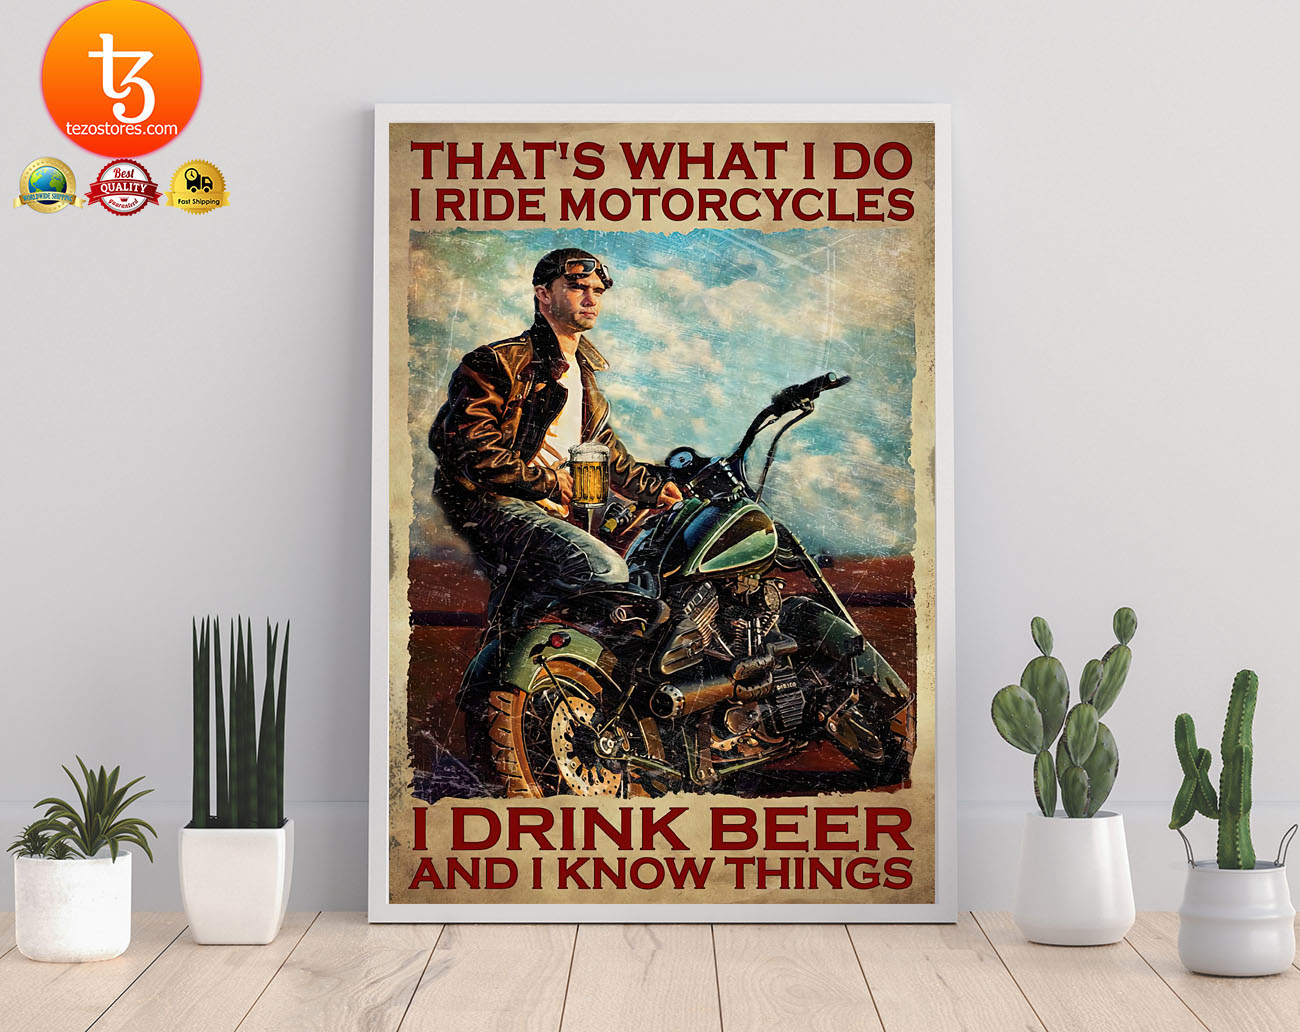 Thats what I do I ride motorcycles I drink beer and I know things poster2